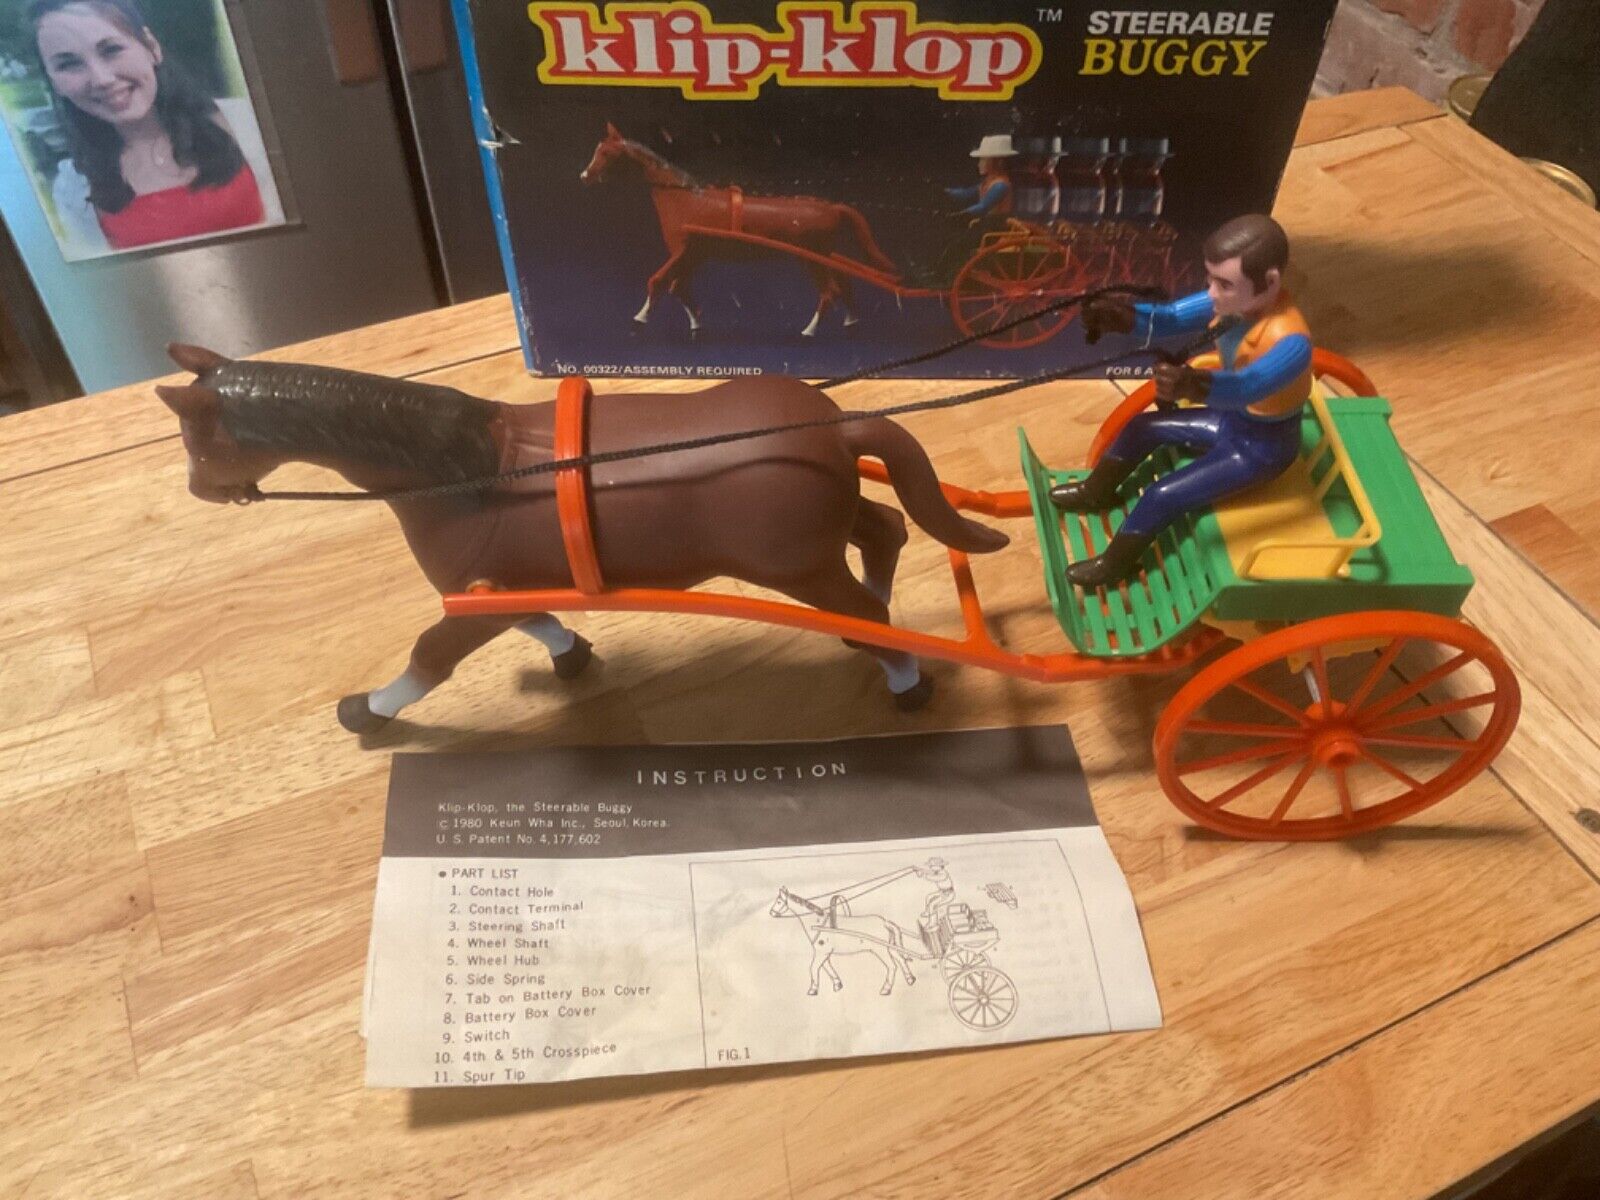 Vintage Klip-Klop steerable buggy from 1980 by Ken Wha Inc. manufactured in 1980